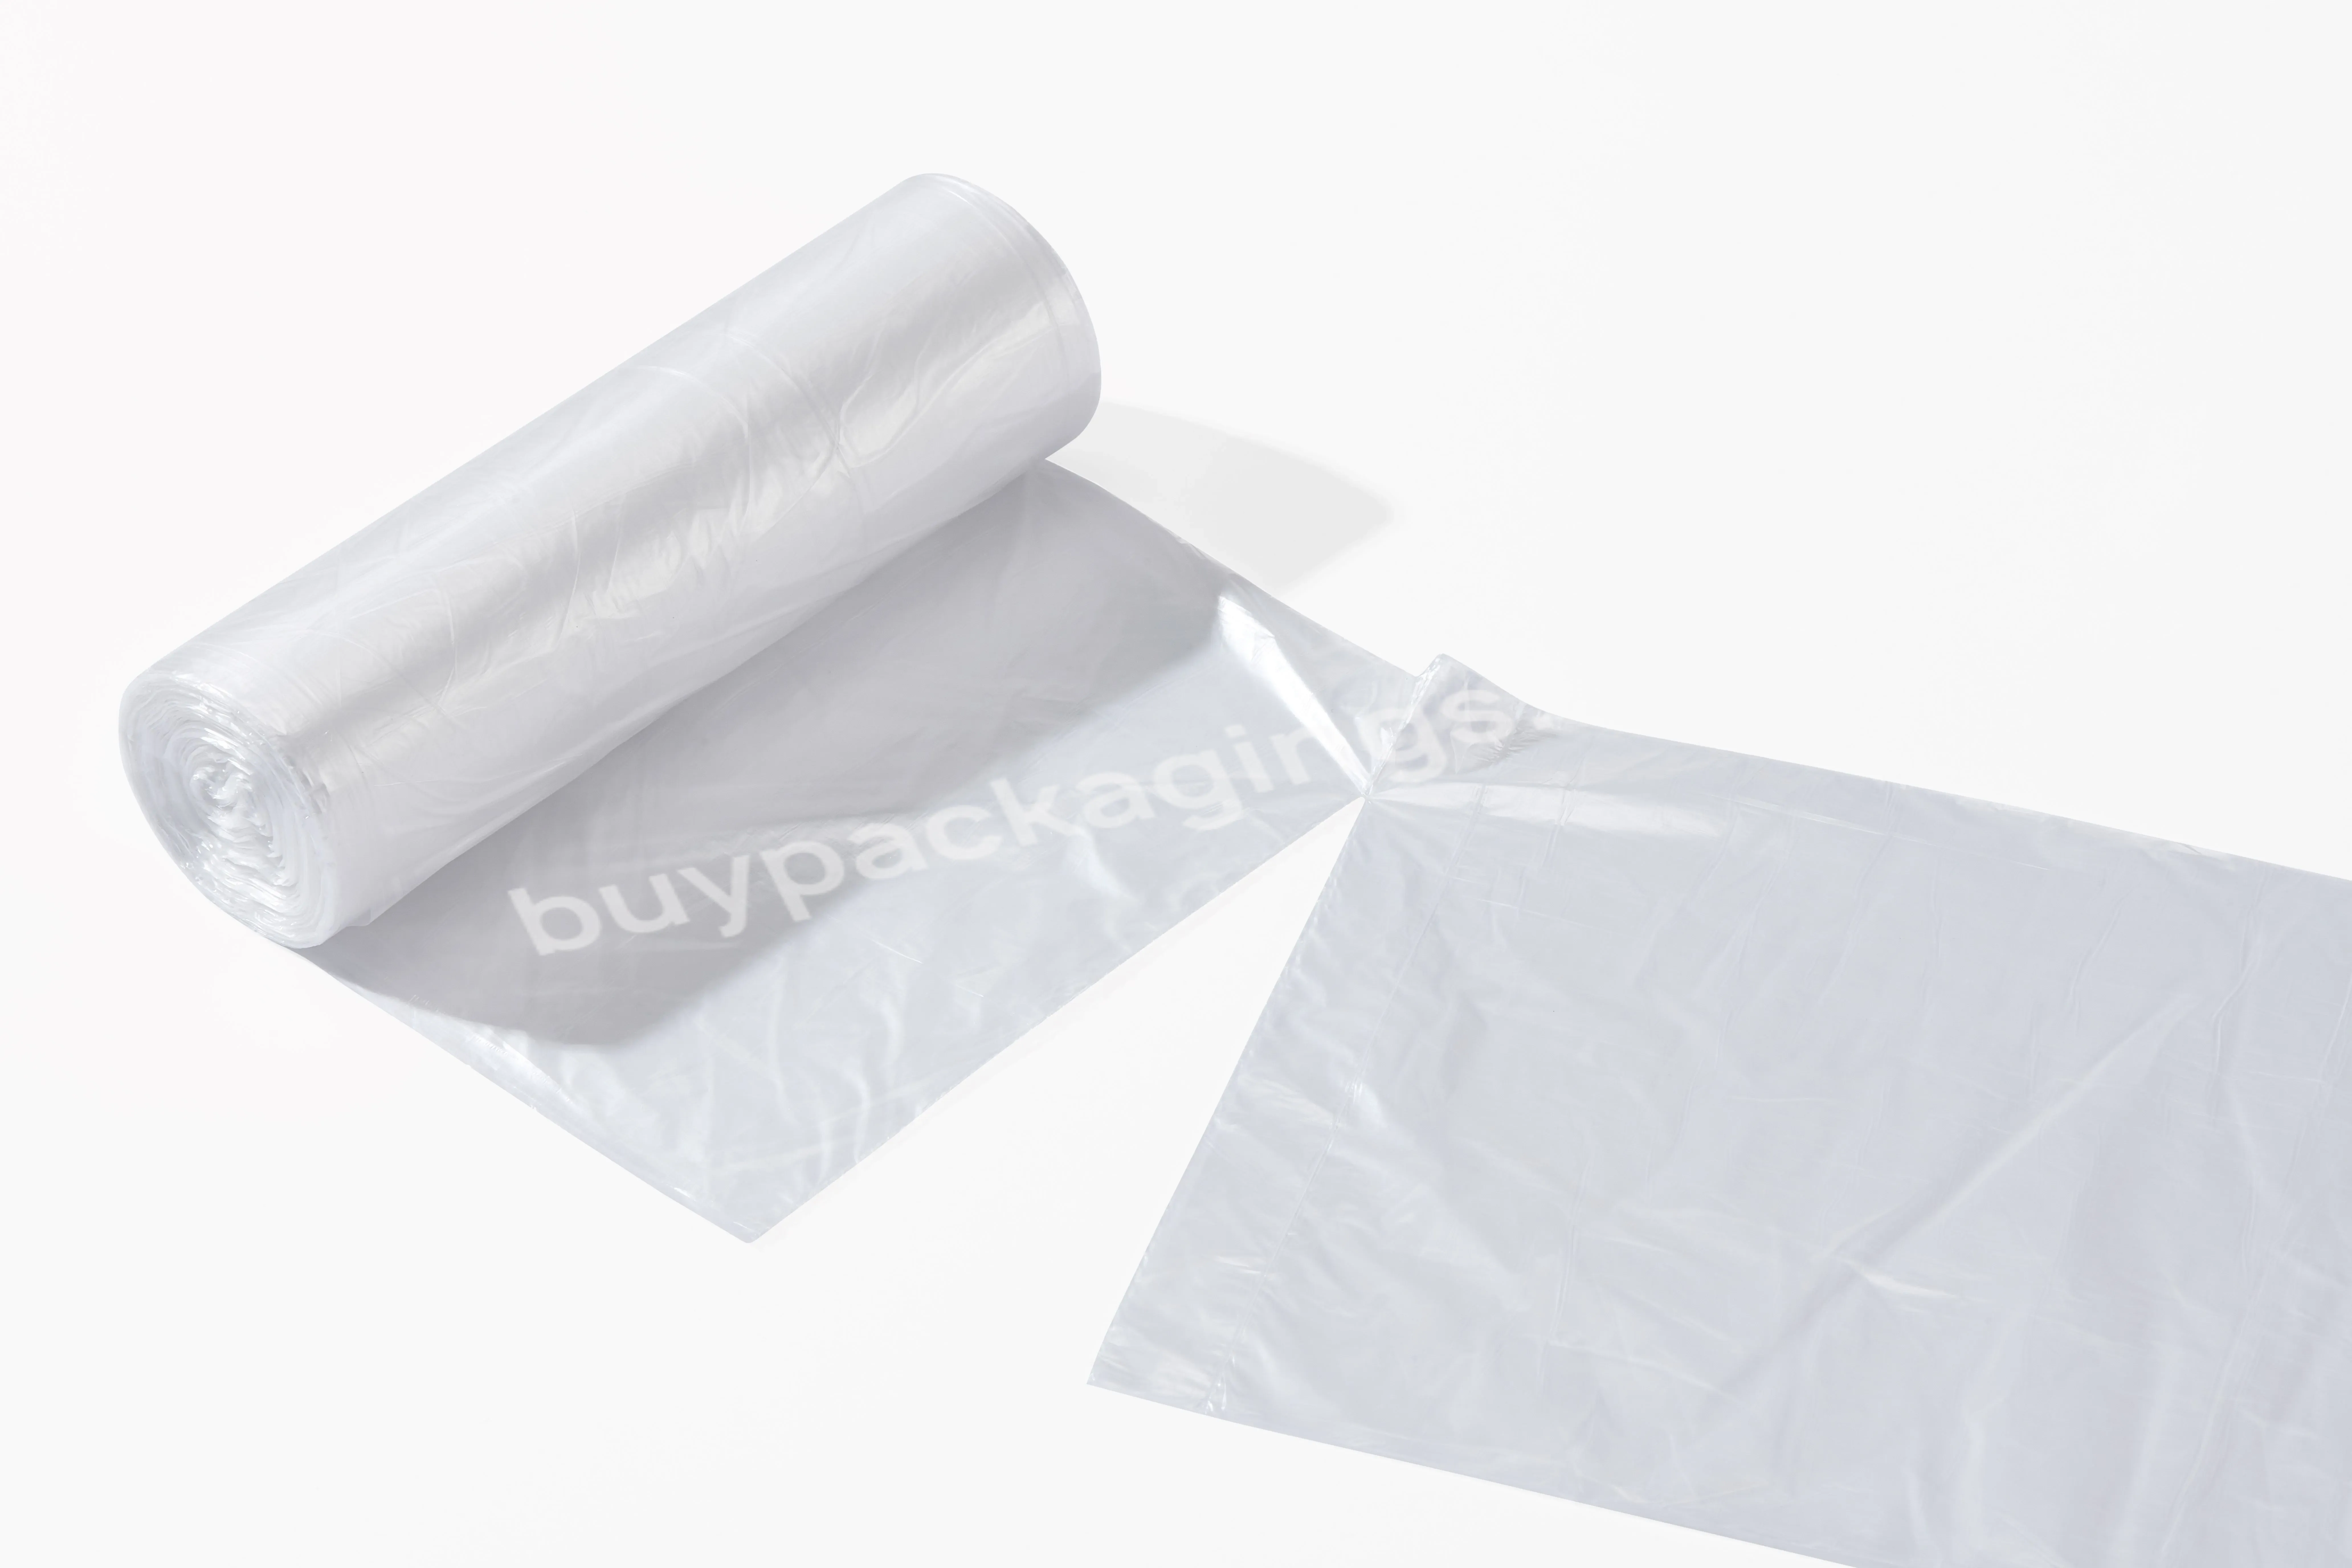 24'' X 33'' 13 Gallons Clear Garbage Bags,High Density Can-liners Trash Bag For Office,Household